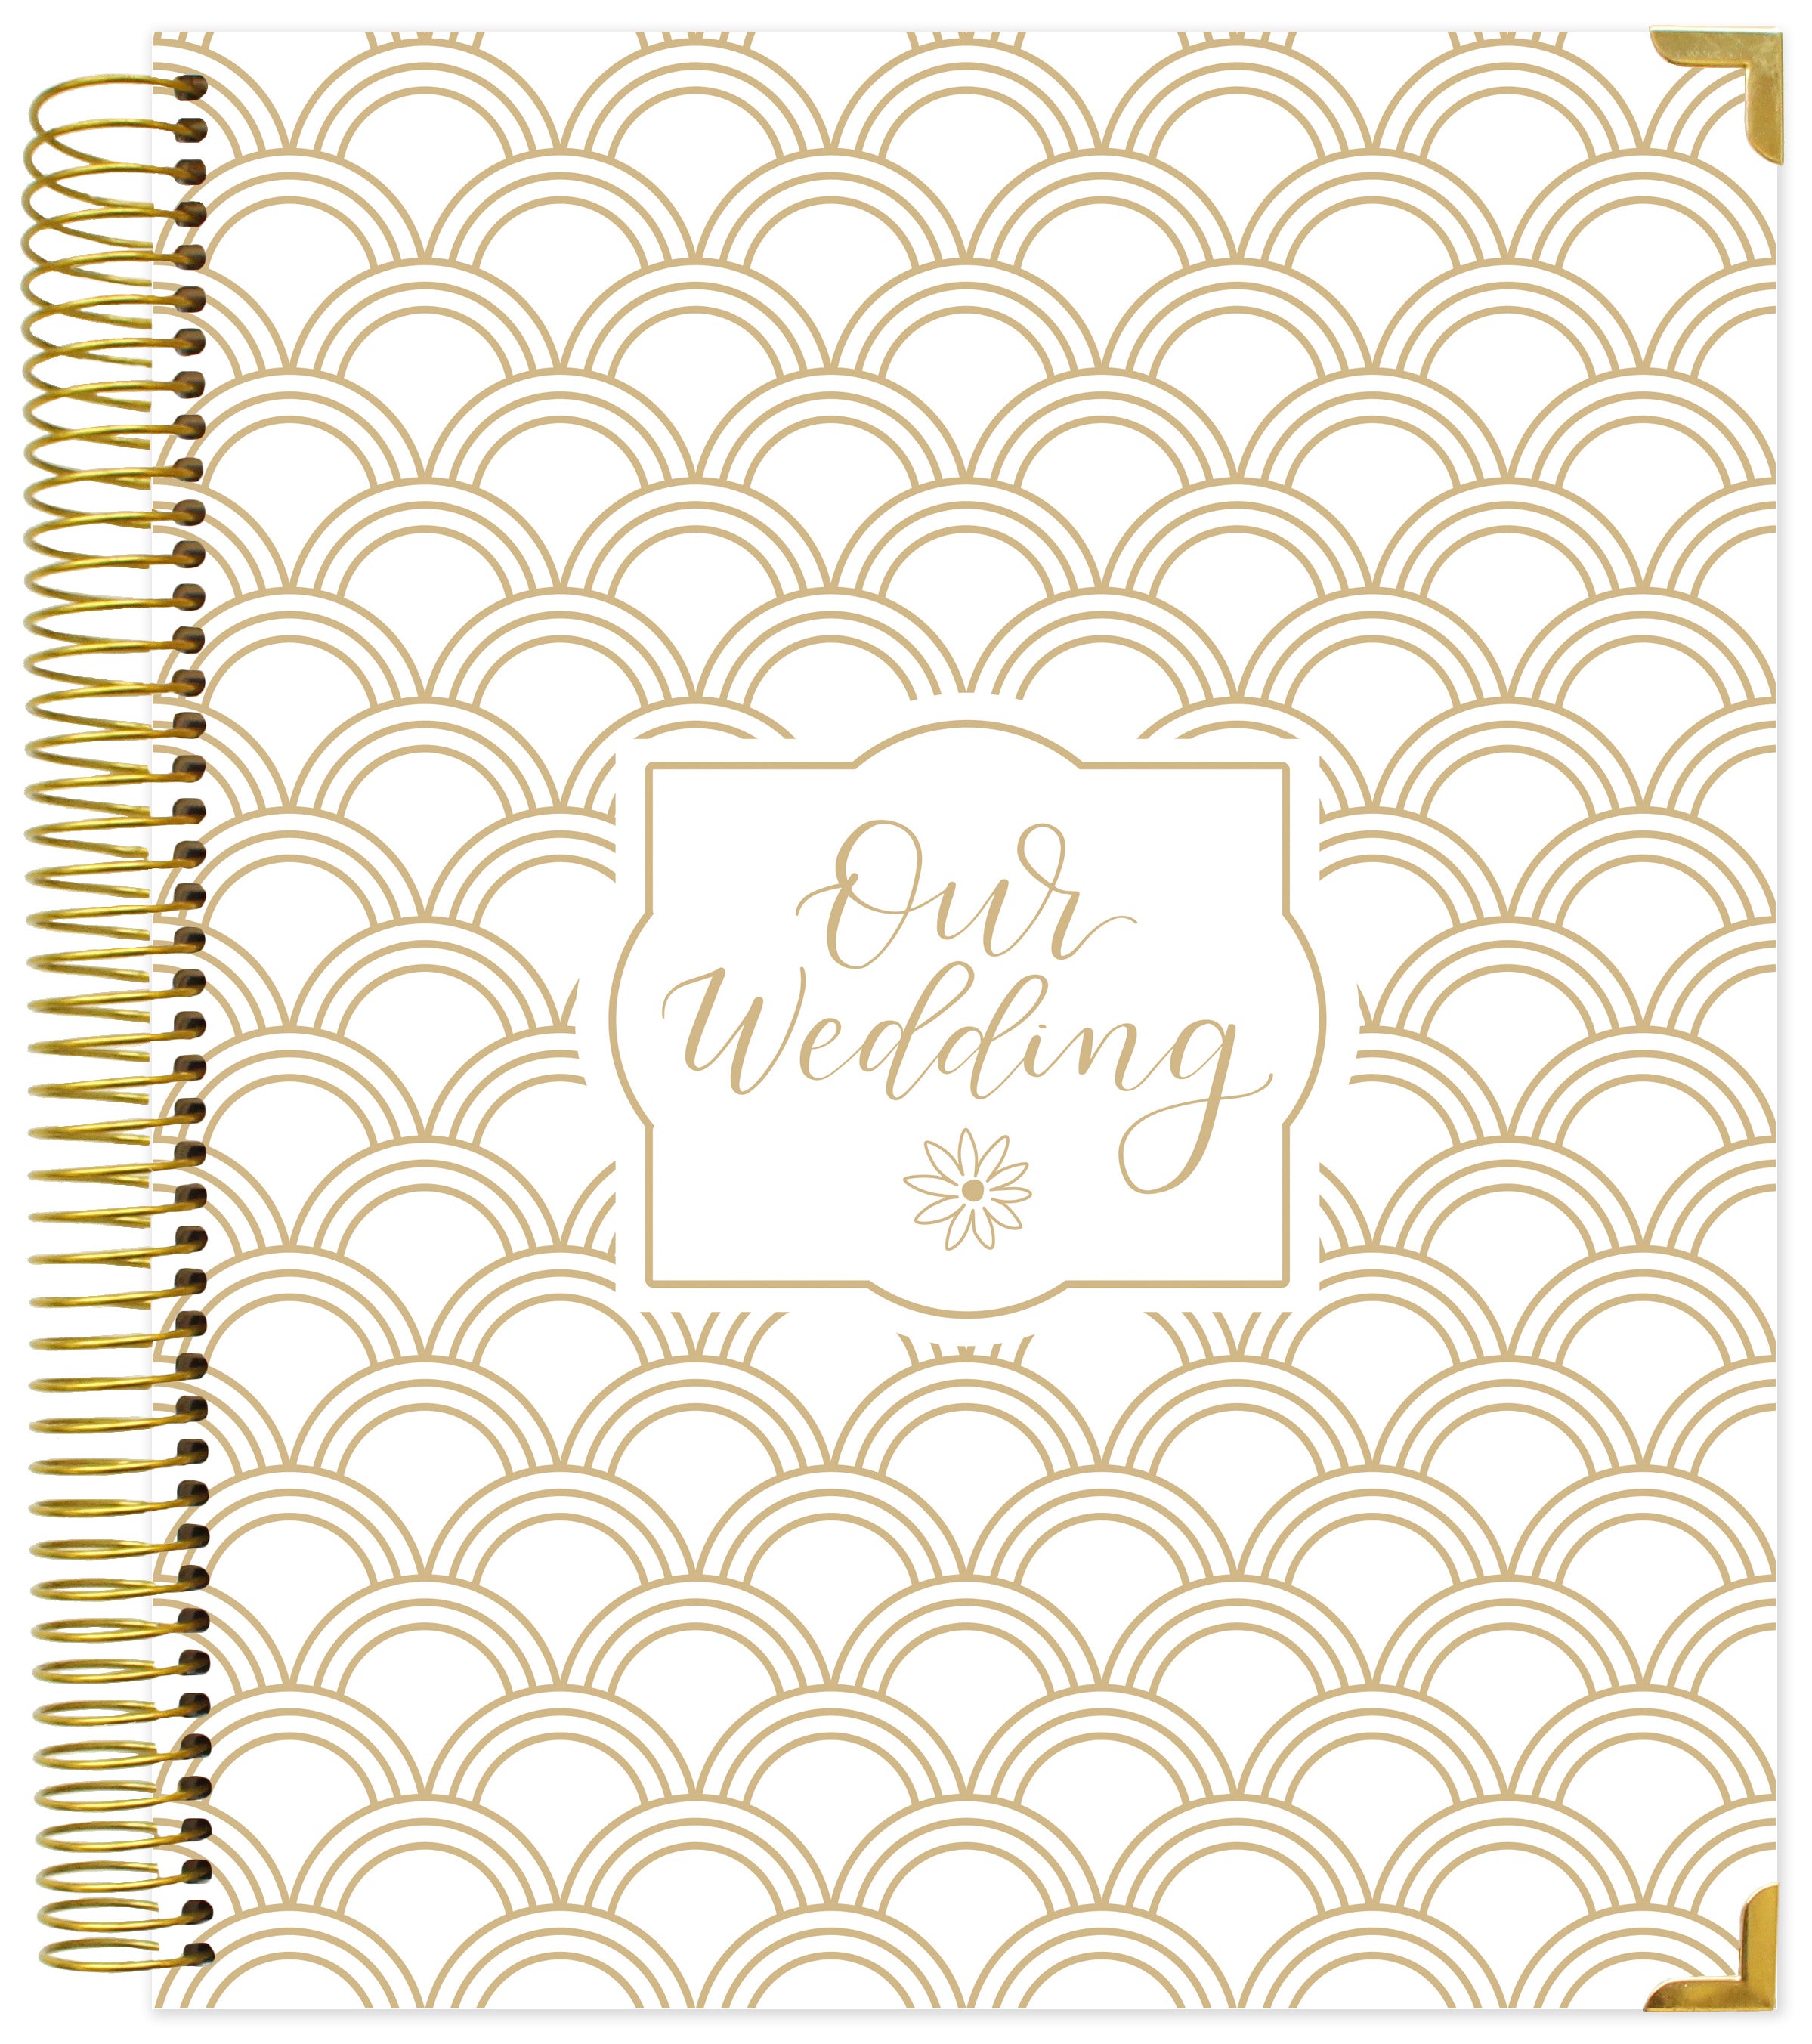 Our Wedding Layout with Process Video  Wedding scrapbook pages, Wedding  scrapbooking layouts, Wedding scrapbook